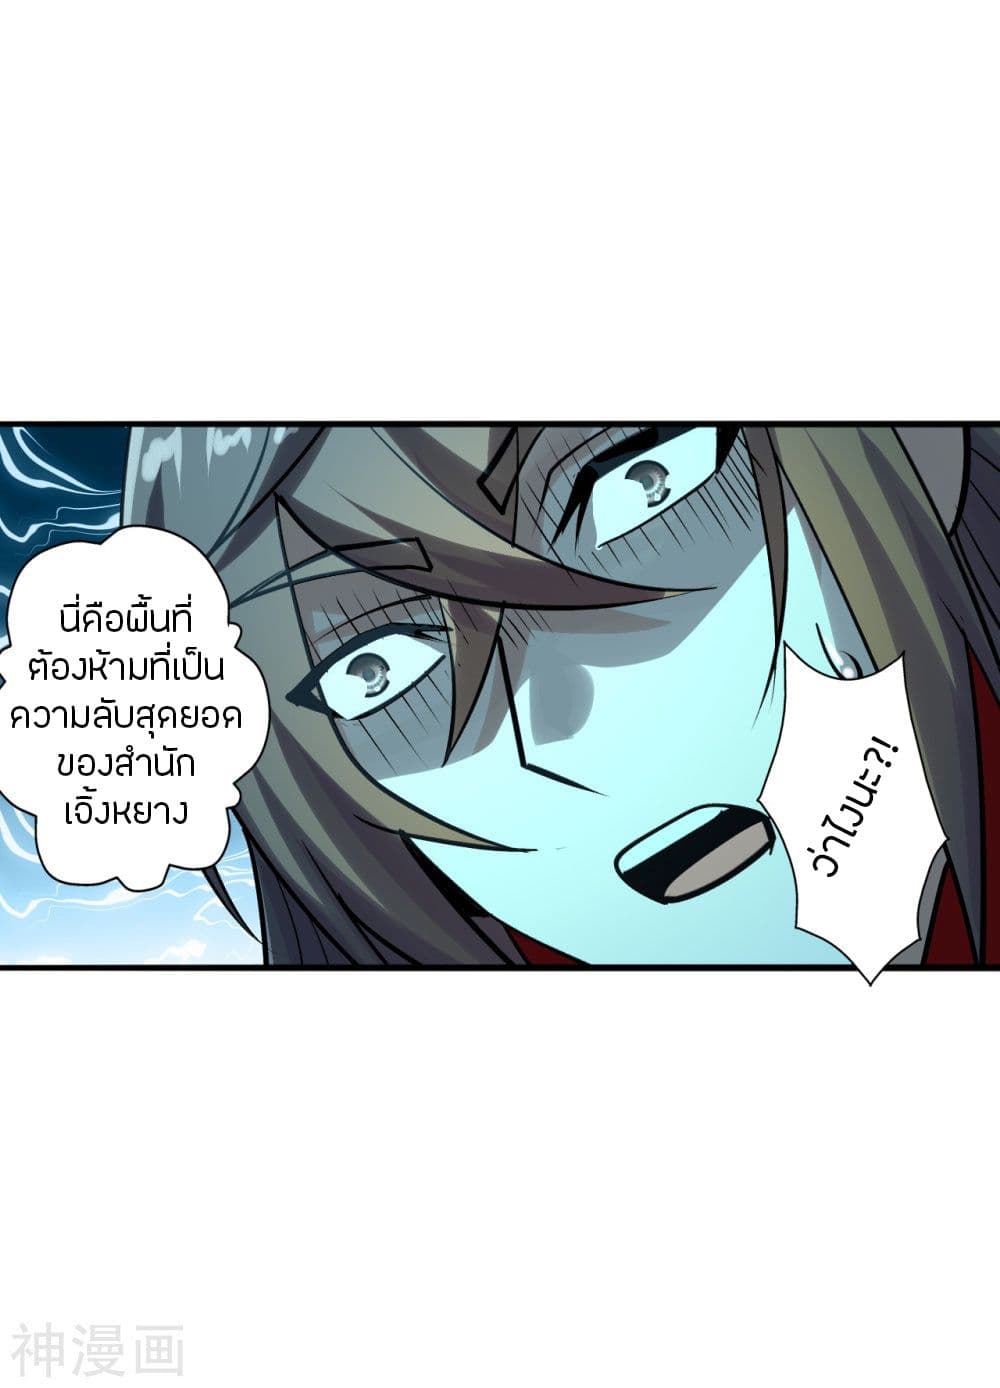 Banished Disciple's Counterattack เธเธฑเธเธฃเธเธฃเธฃเธ”เธดเน€เธเธตเธขเธเธขเธธเธ—เธ 239 (21)